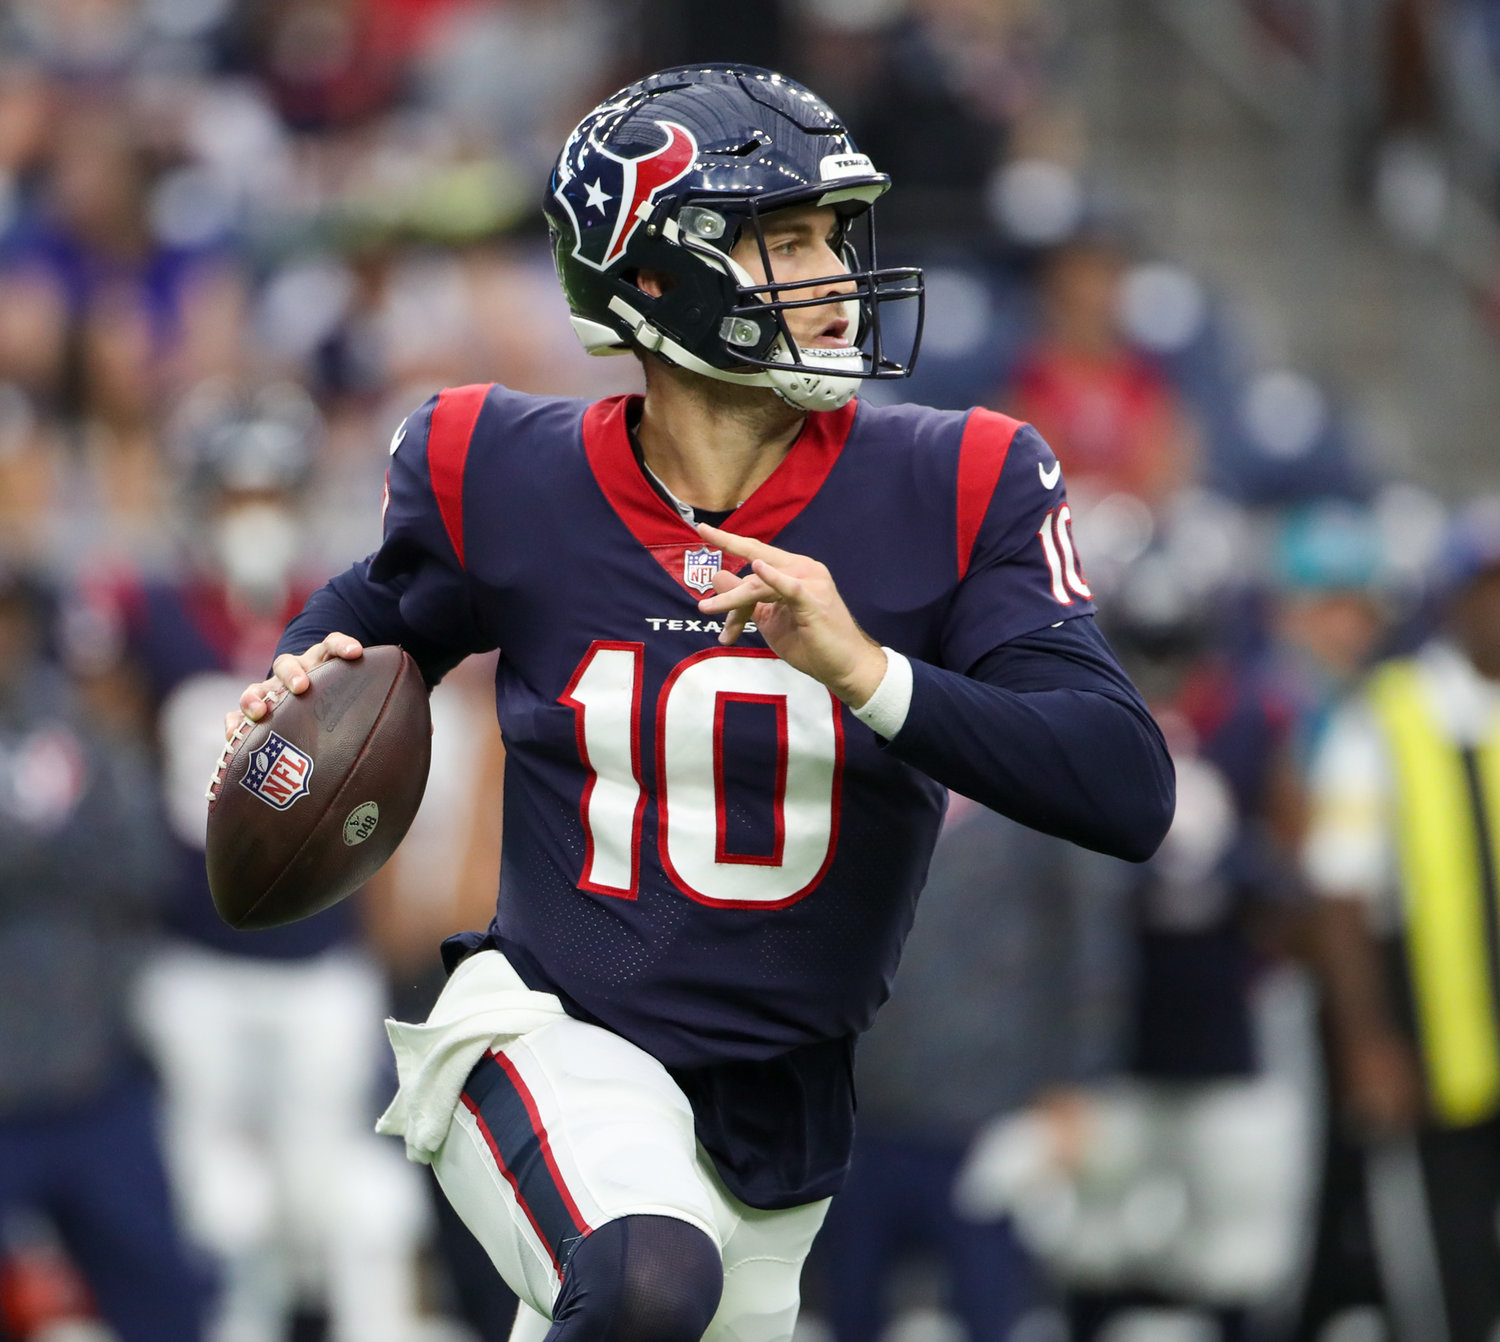 Houston Texans quarterback Davis Mills runs with the ball during an NFL game between Houston and New England on October 10, 2021 in Houston, Texas. The Patriots won 25-22.